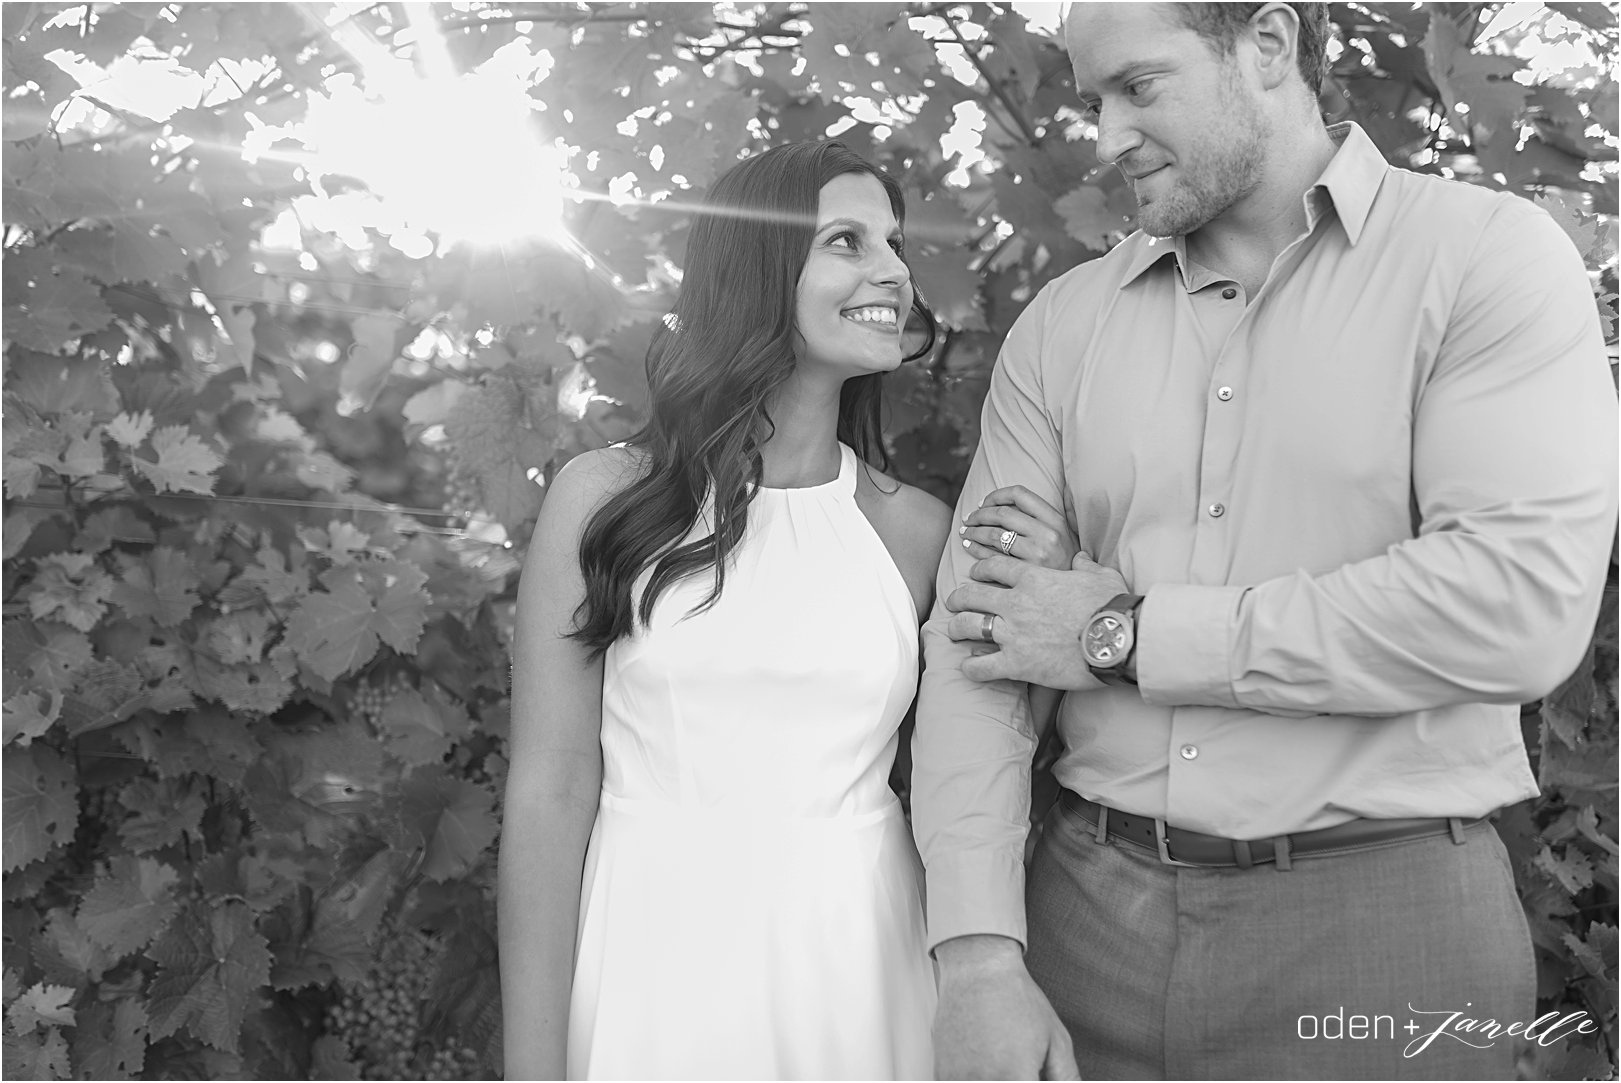 ELENA + JESSE | Oden and Janelle Photography 2016 |ODE_5047|20.jpg